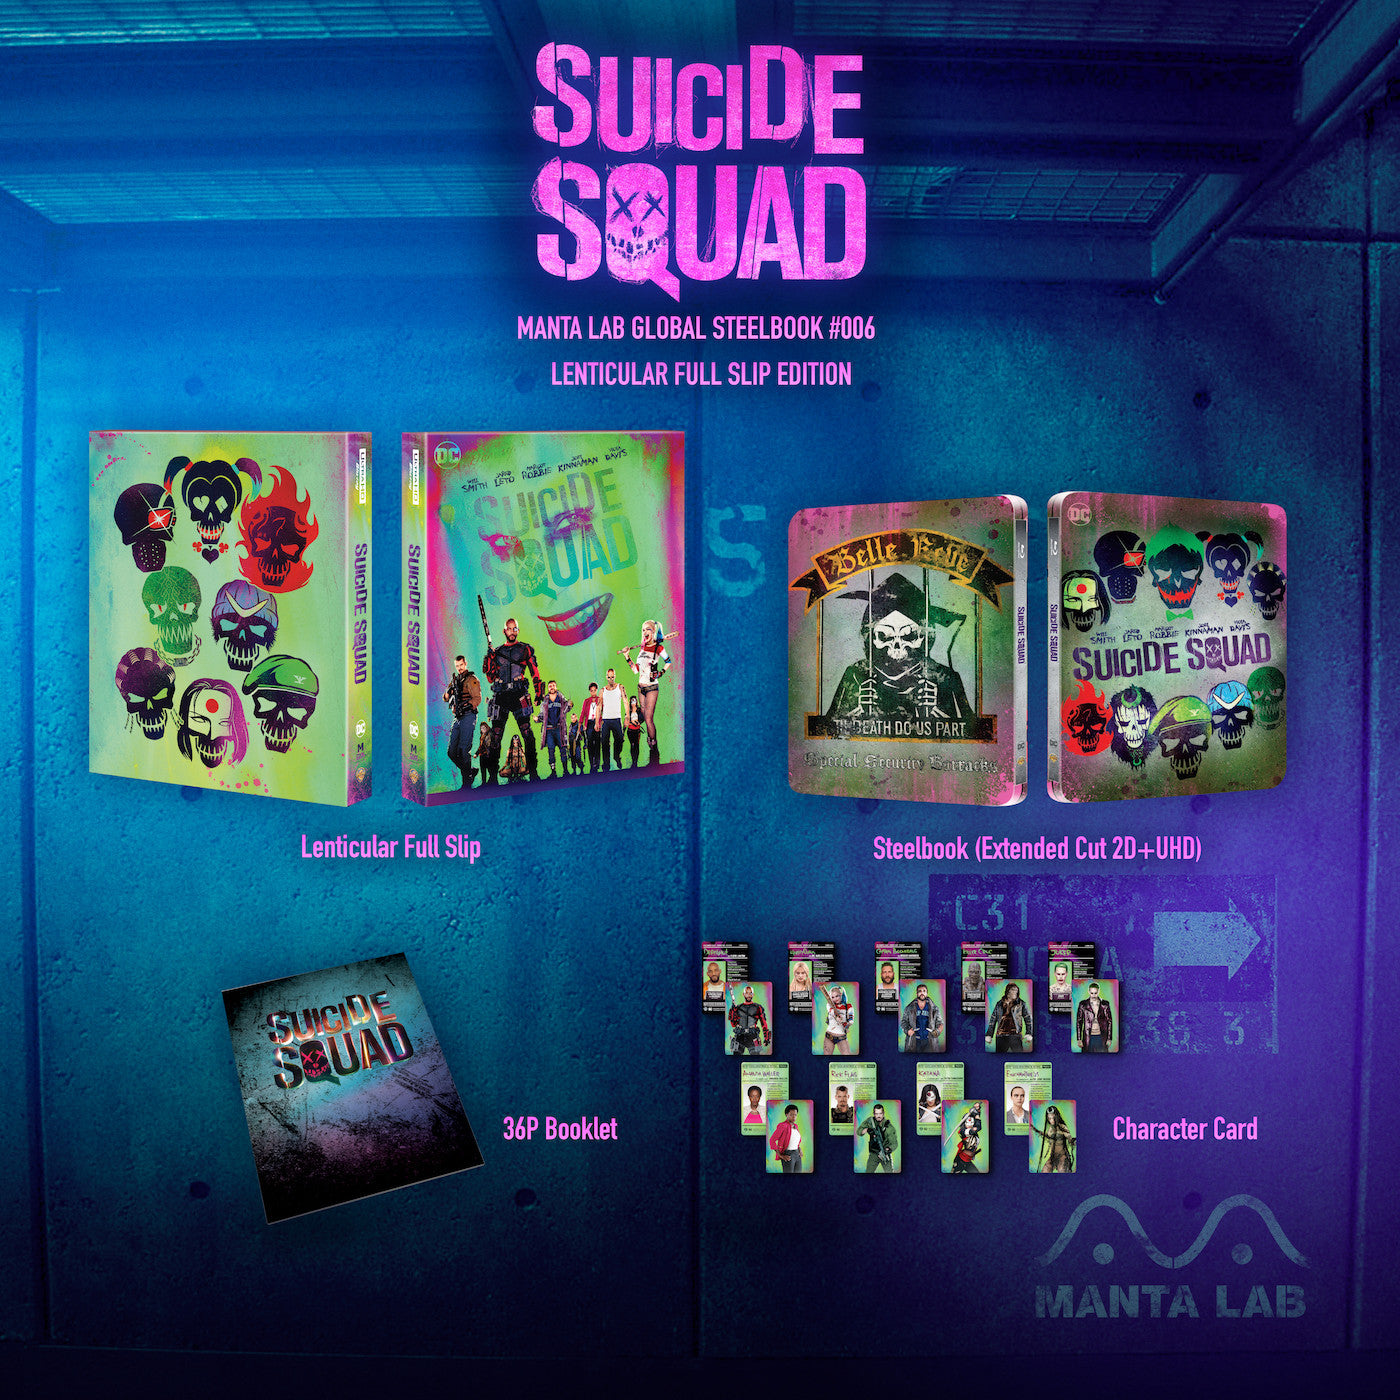 MG#6] Suicide Squad Steelbook (Extended Cut 2D+UHD) (Lenticular 